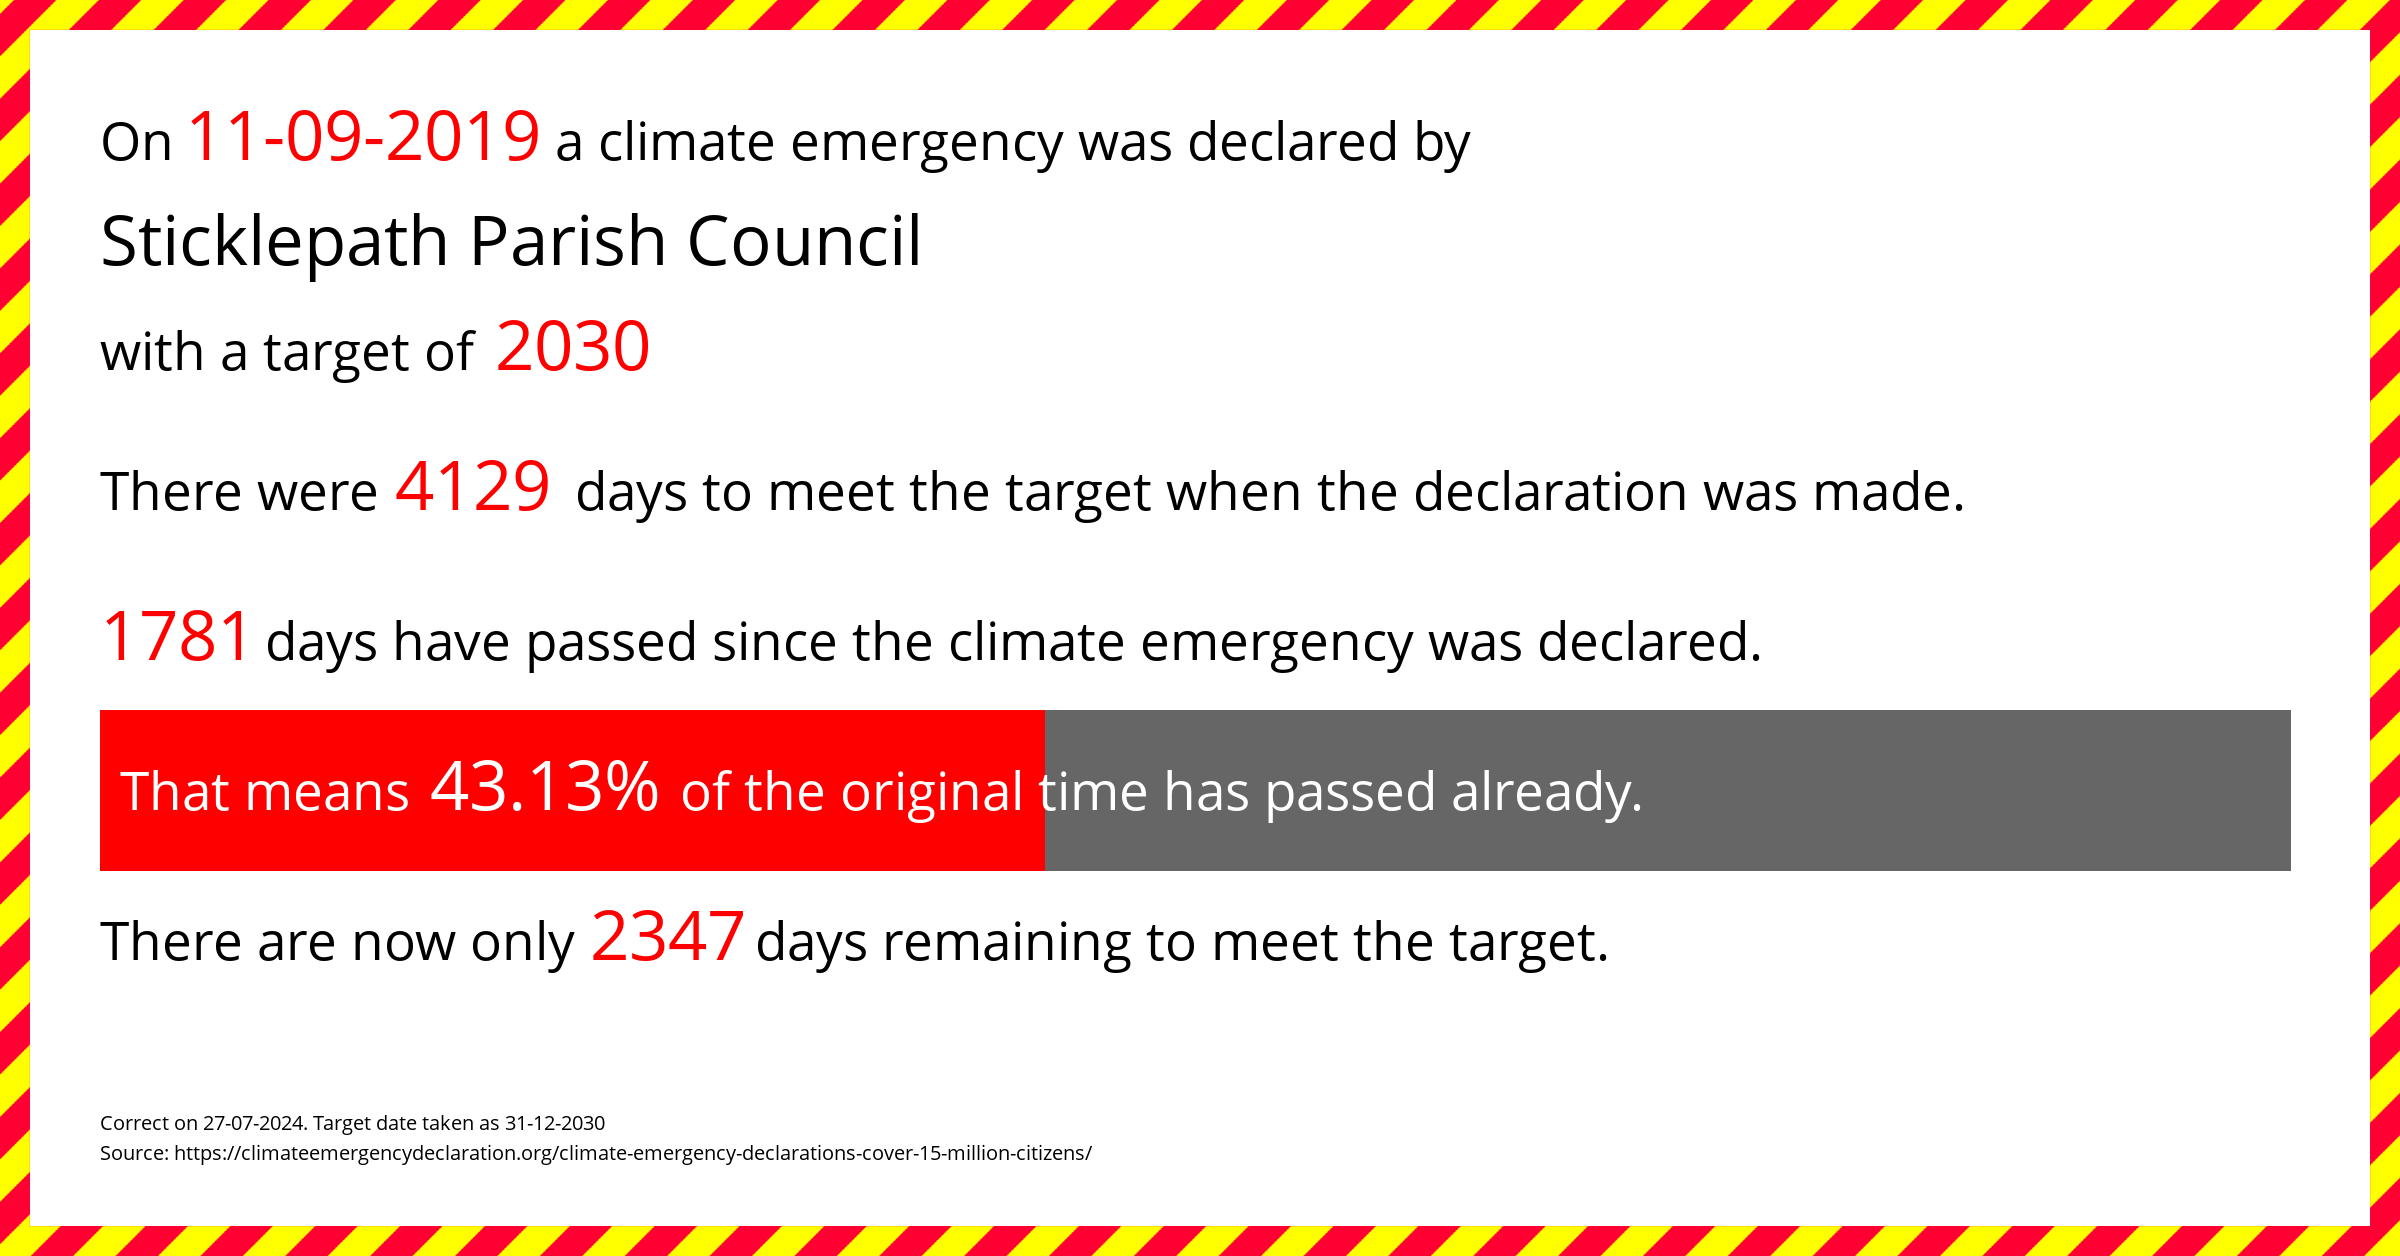 Sticklepath Parish Council declared a Climate emergency on Wednesday 11th September 2019, with a target of 2030.